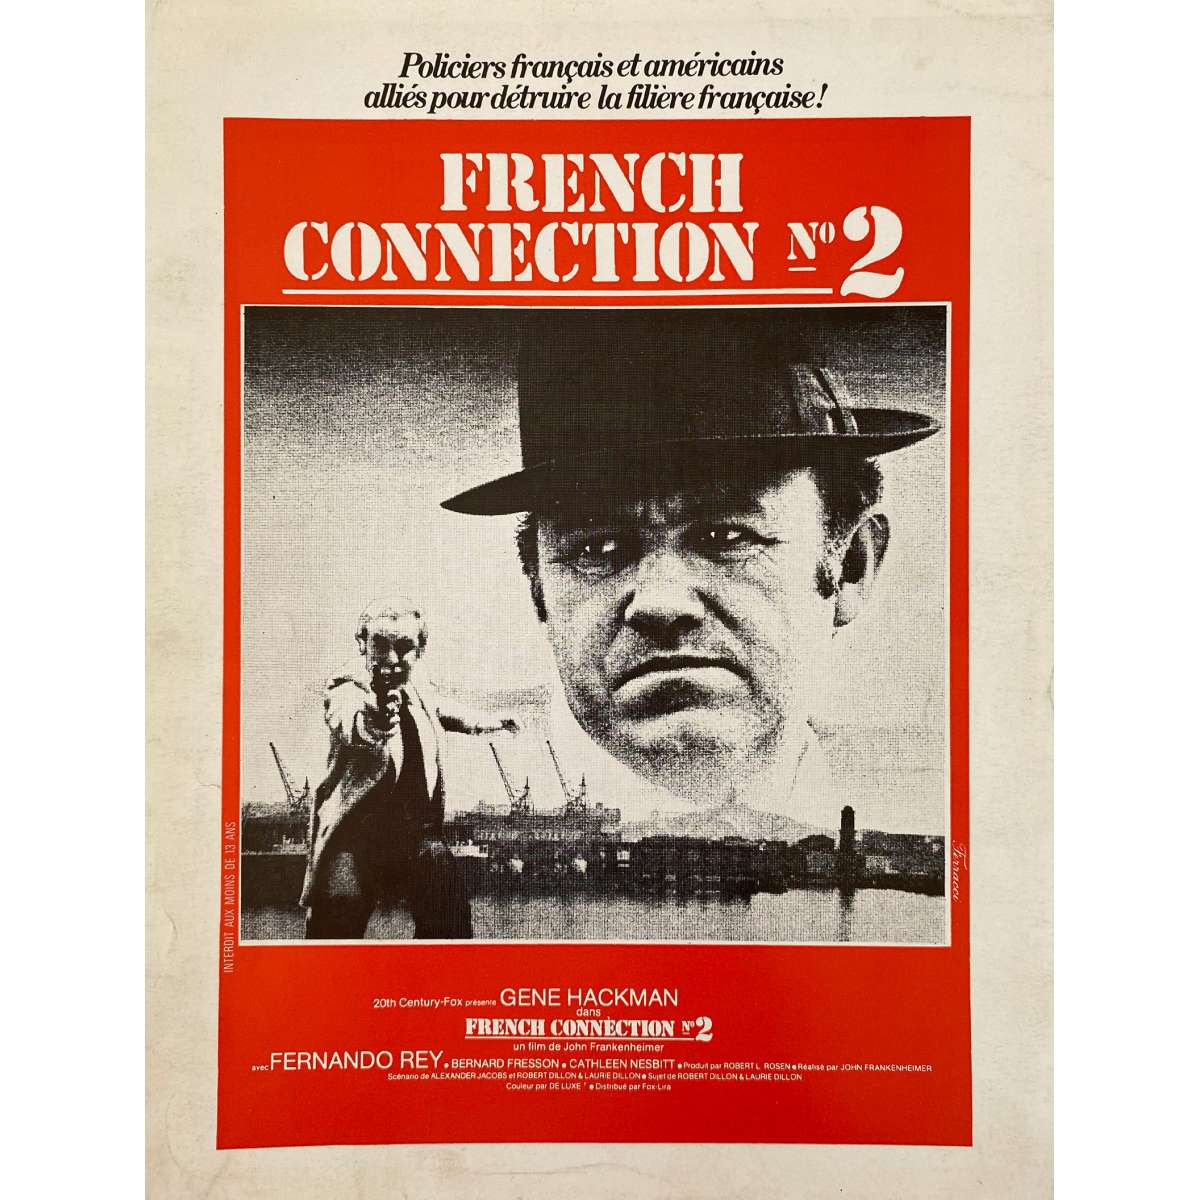 FRENCH CONNECTION II French Movie Poster - 10x12 in. - 1975 2p